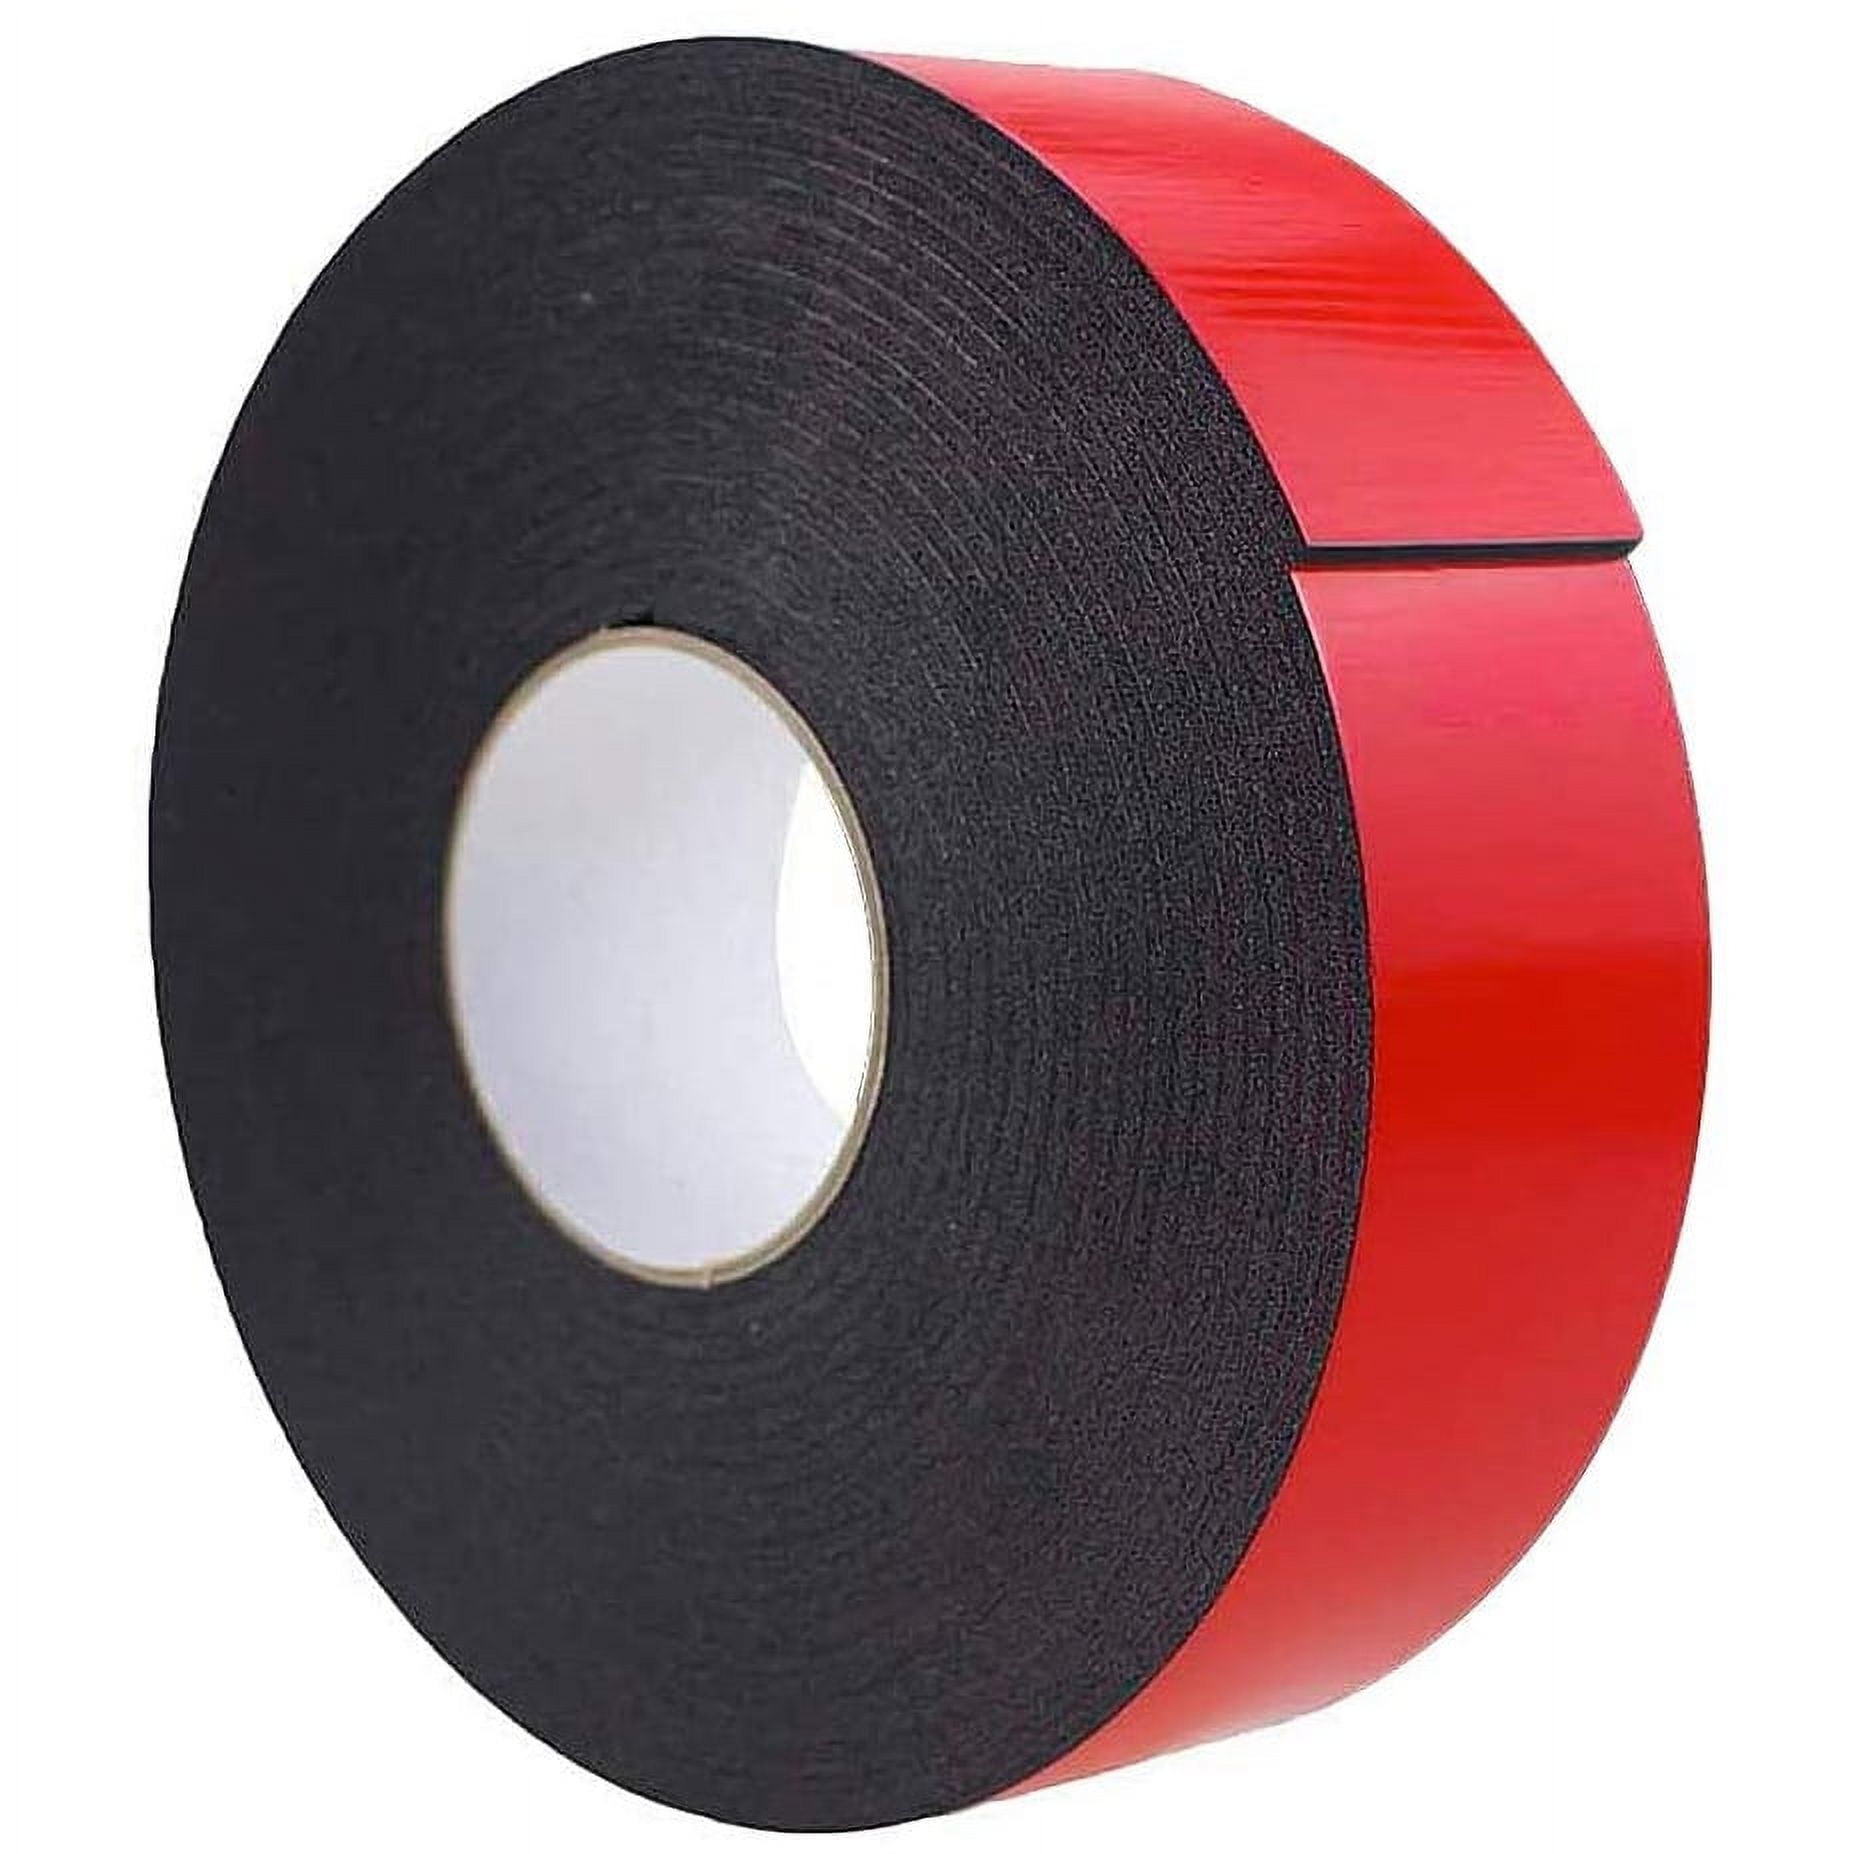 Self-adhesive cork tape 3mm x 100mm x 30m - Self adhesive cork strips -  Experts in cork products!